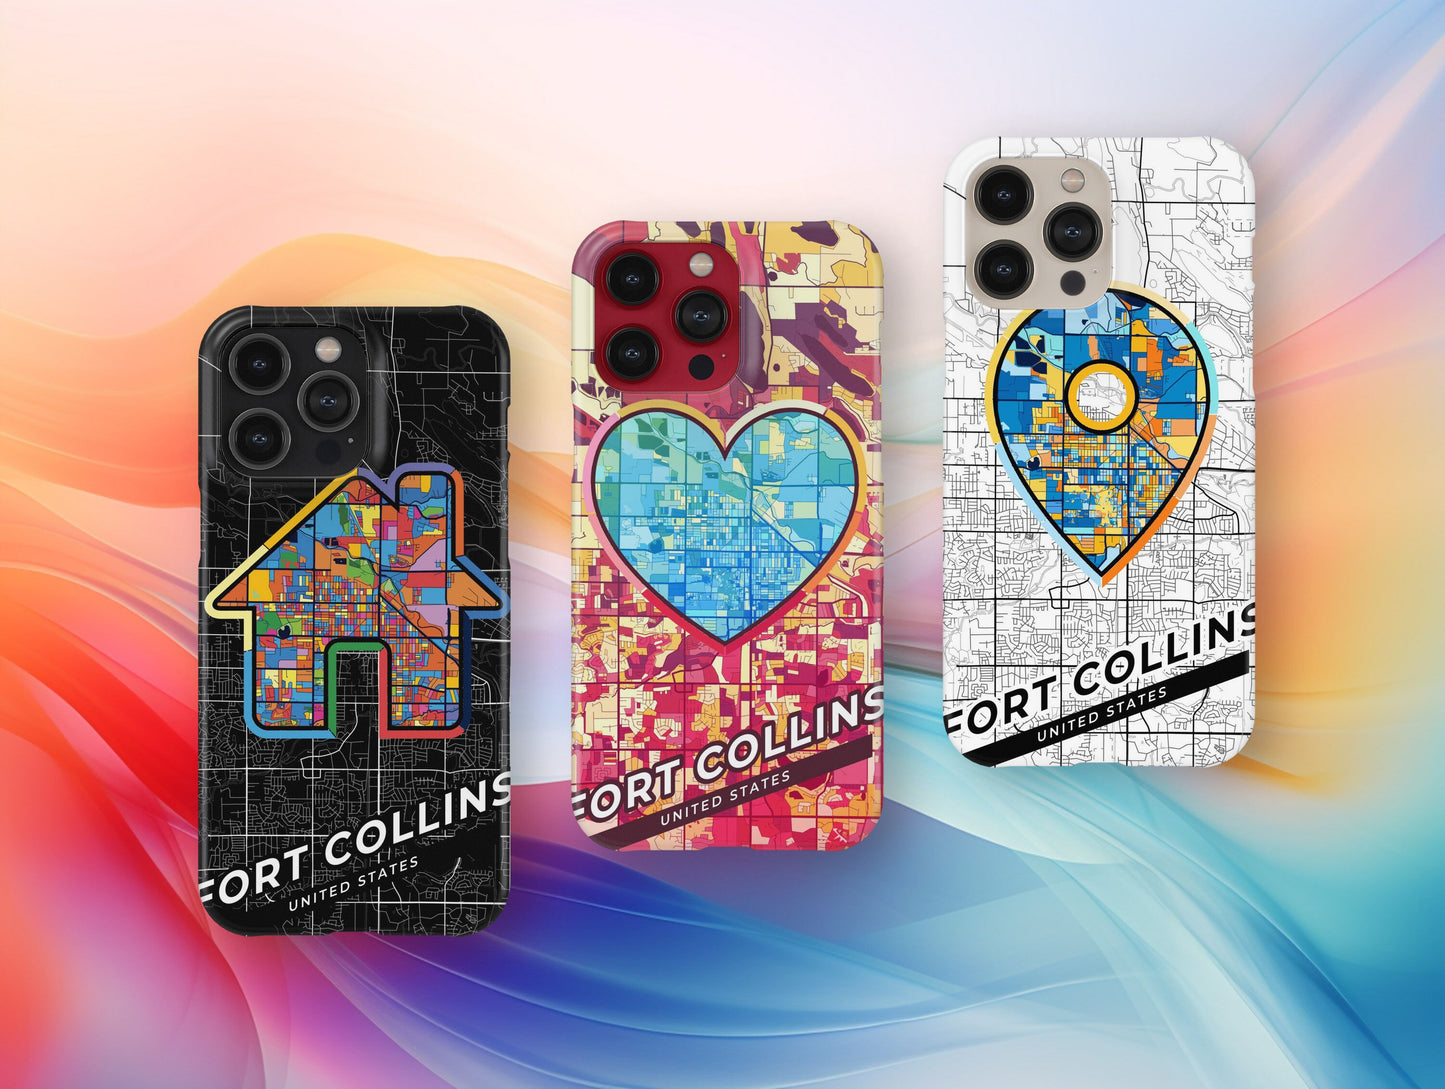 Fort Collins Colorado slim phone case with colorful icon. Birthday, wedding or housewarming gift. Couple match cases.